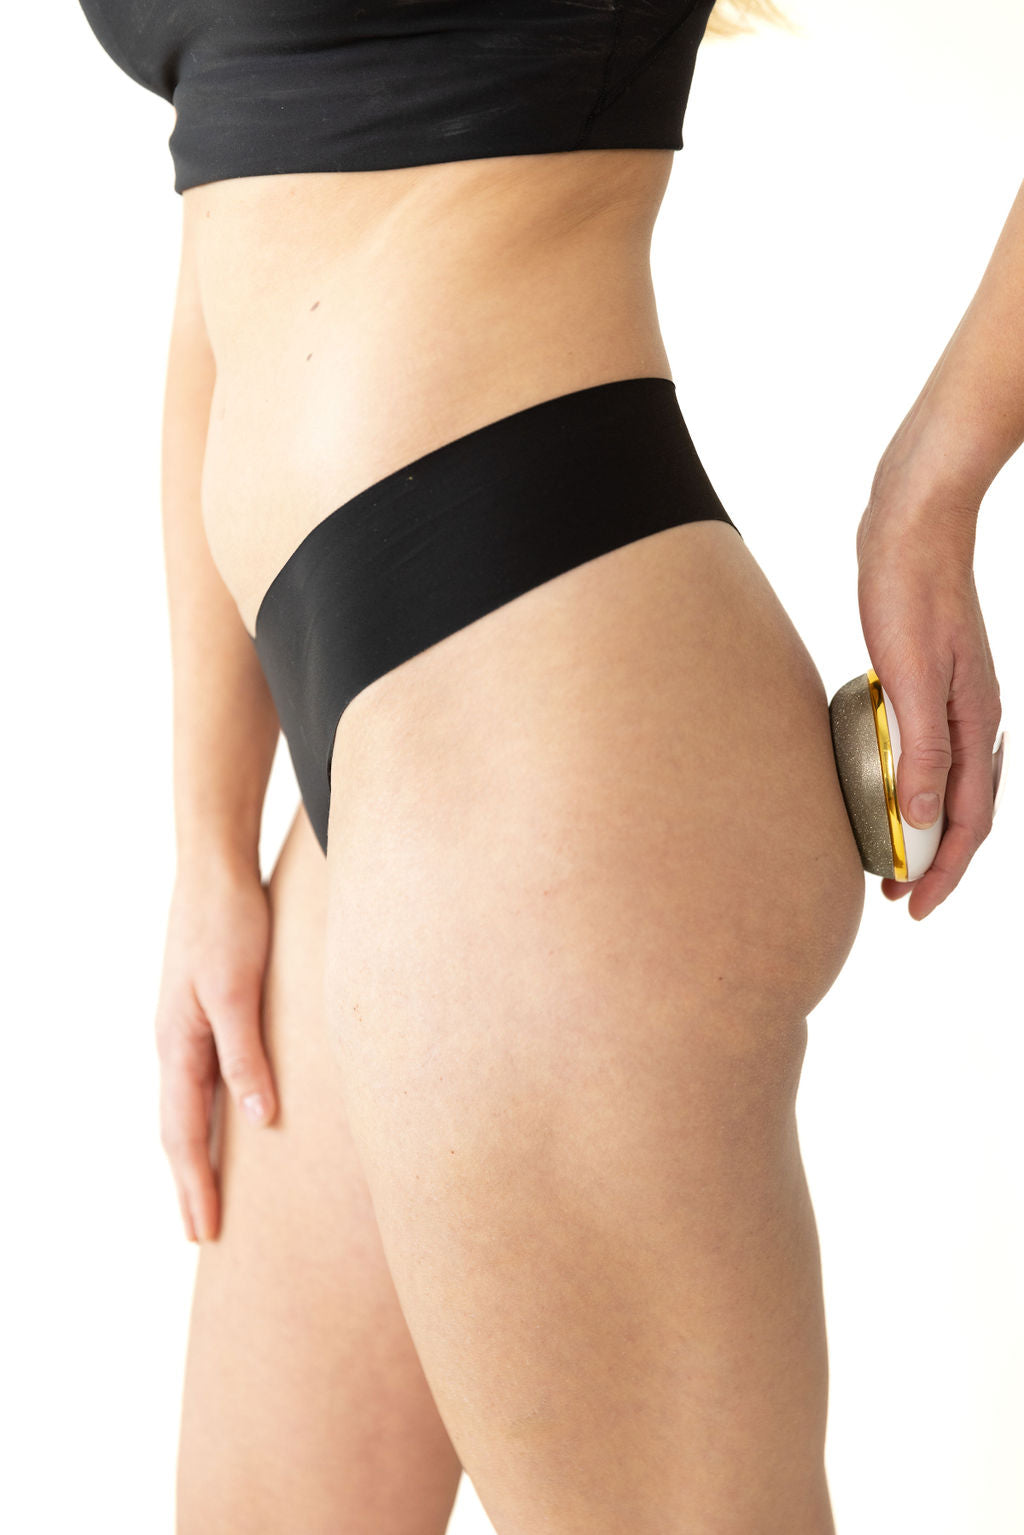 Woman wearing underwear using the FirmaGlow to exfoliate her butt